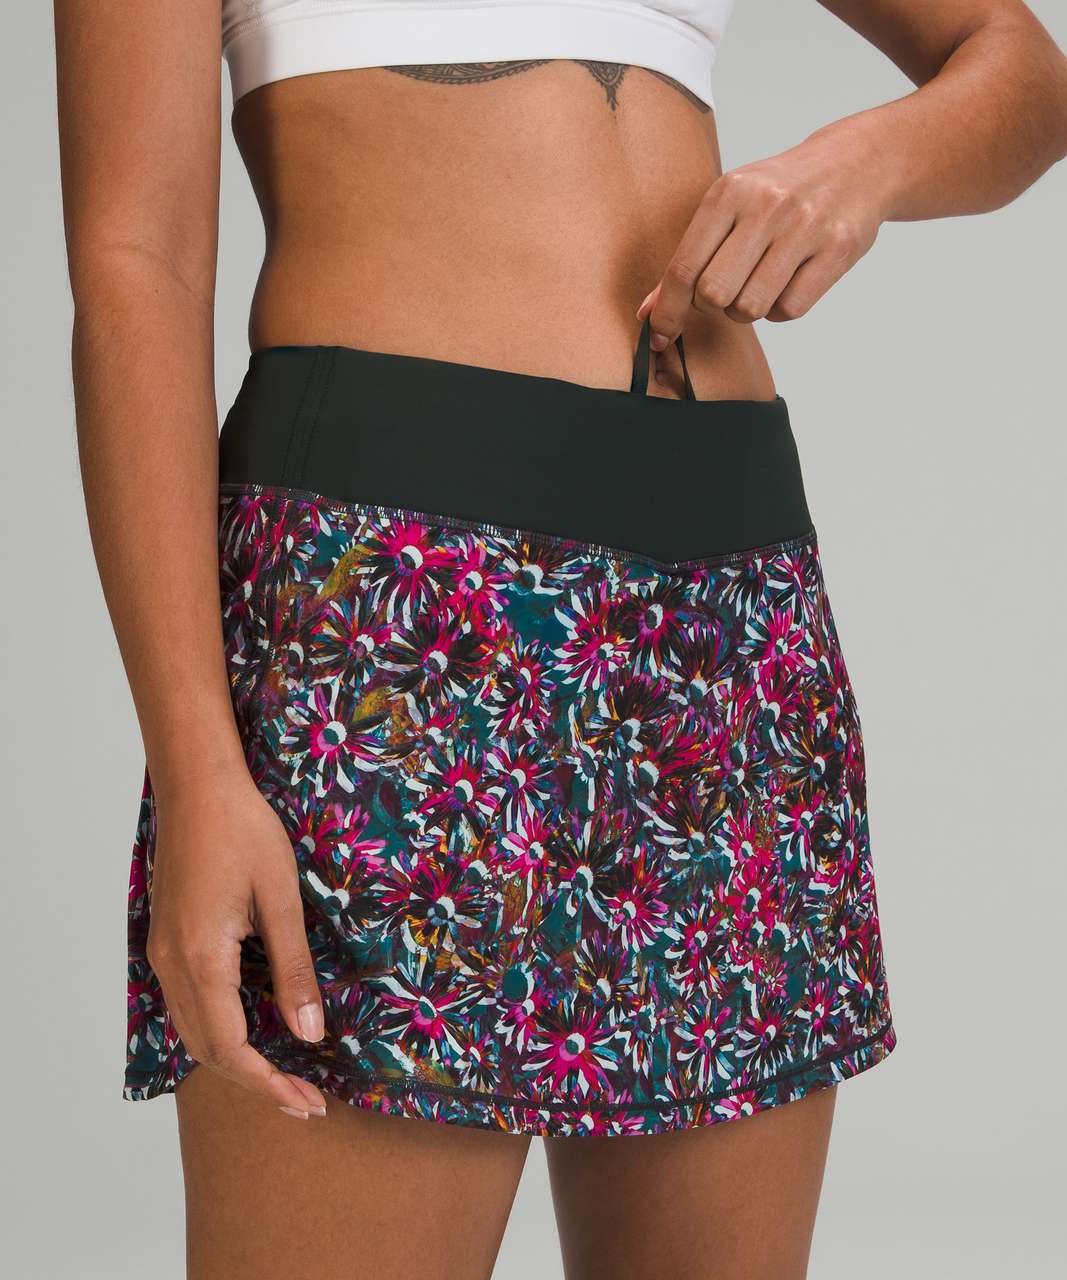 Lululemon Pace Rival Mid-Rise Skirt *Tall - Floral Electric Multi / Rainforest Green